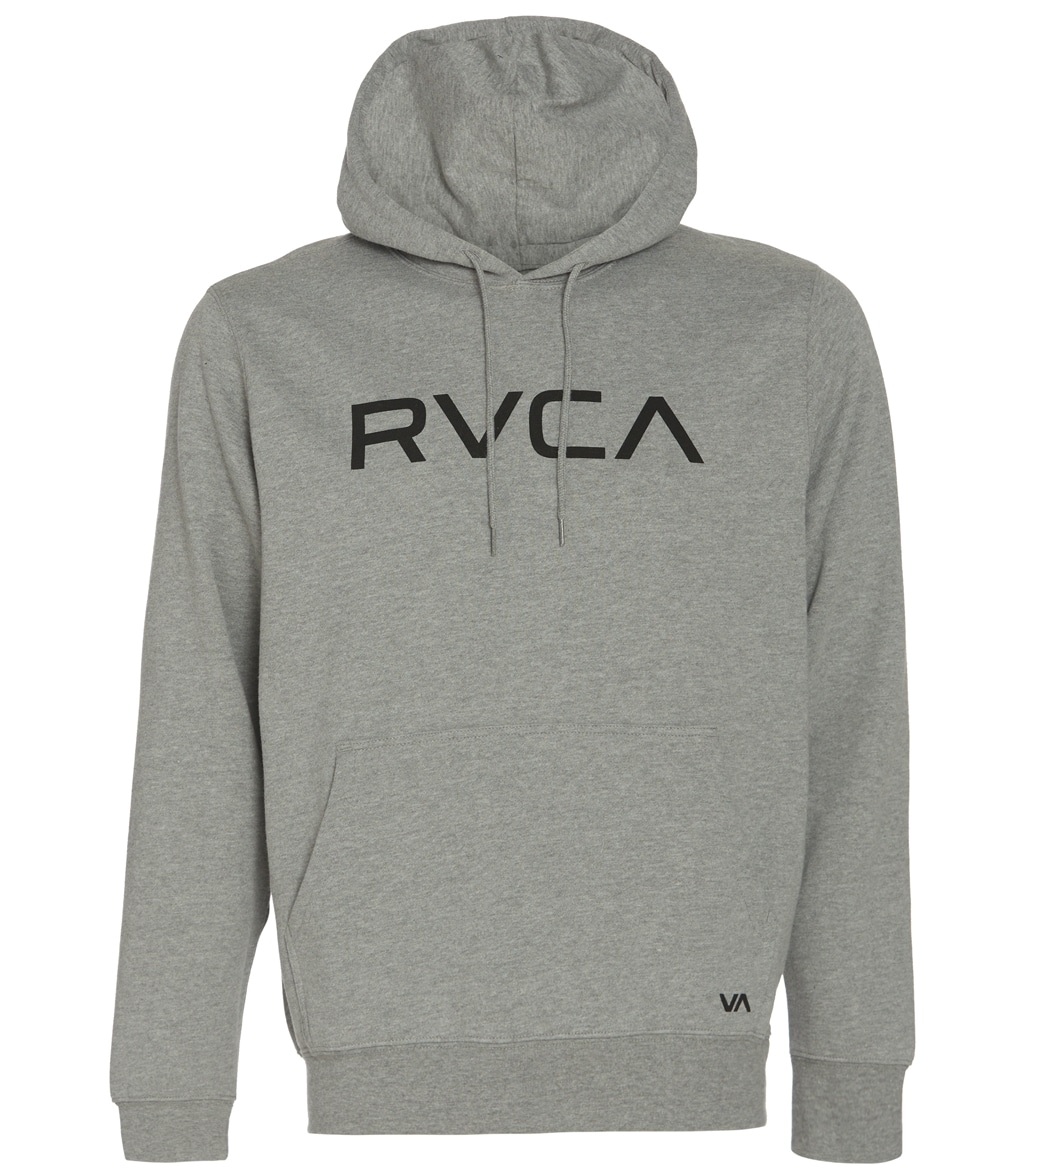 Rvca Men's Big Pullover Hoodie - Athletic Heather Large Cotton/Polyester - Swimoutlet.com